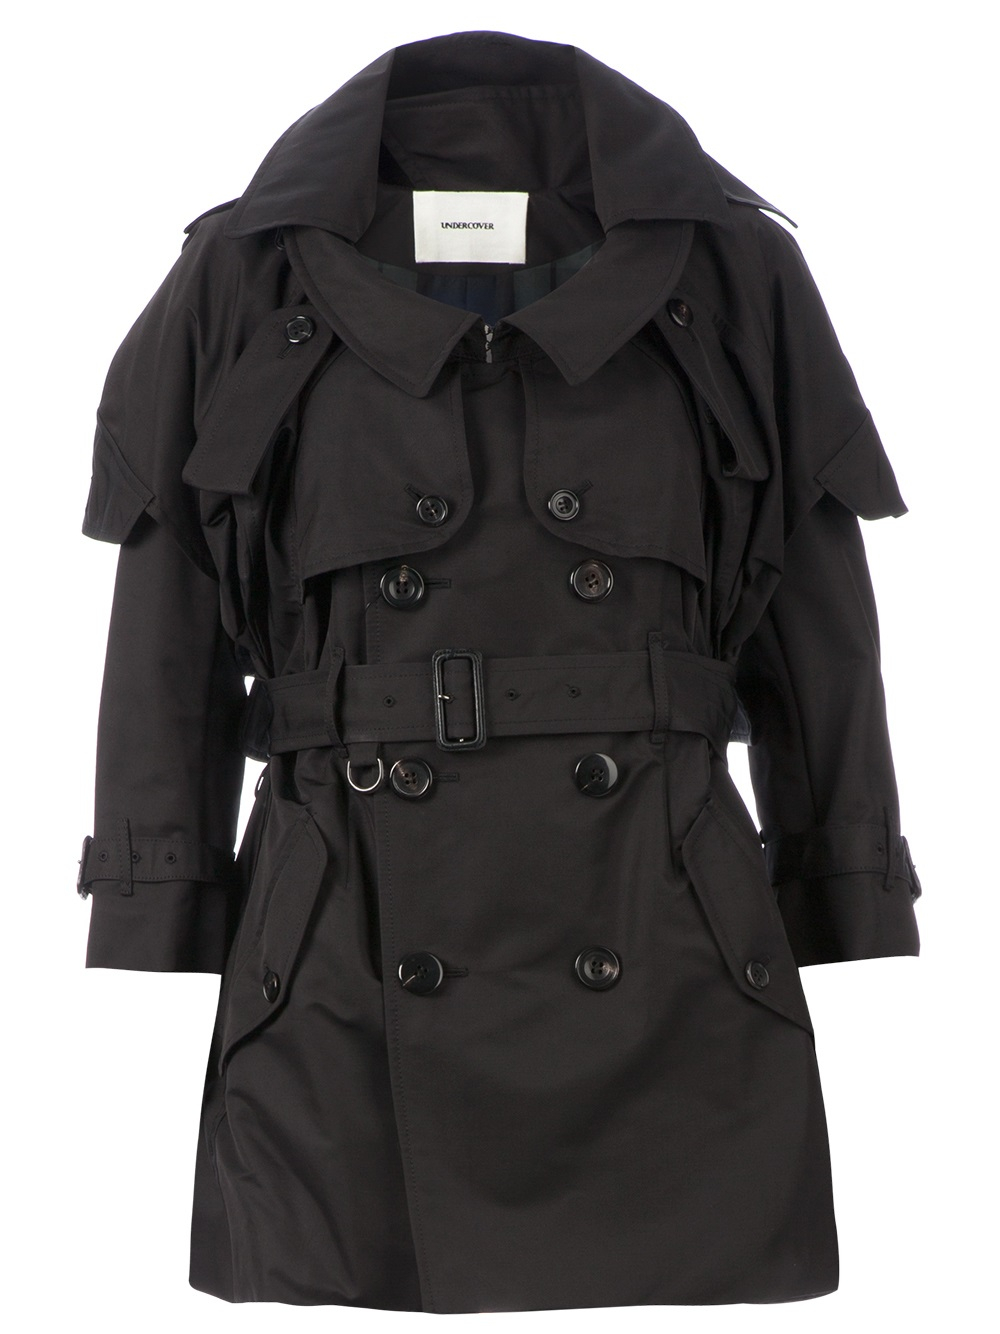 Undercover Slouch Fit Trench Coat in Black - Lyst